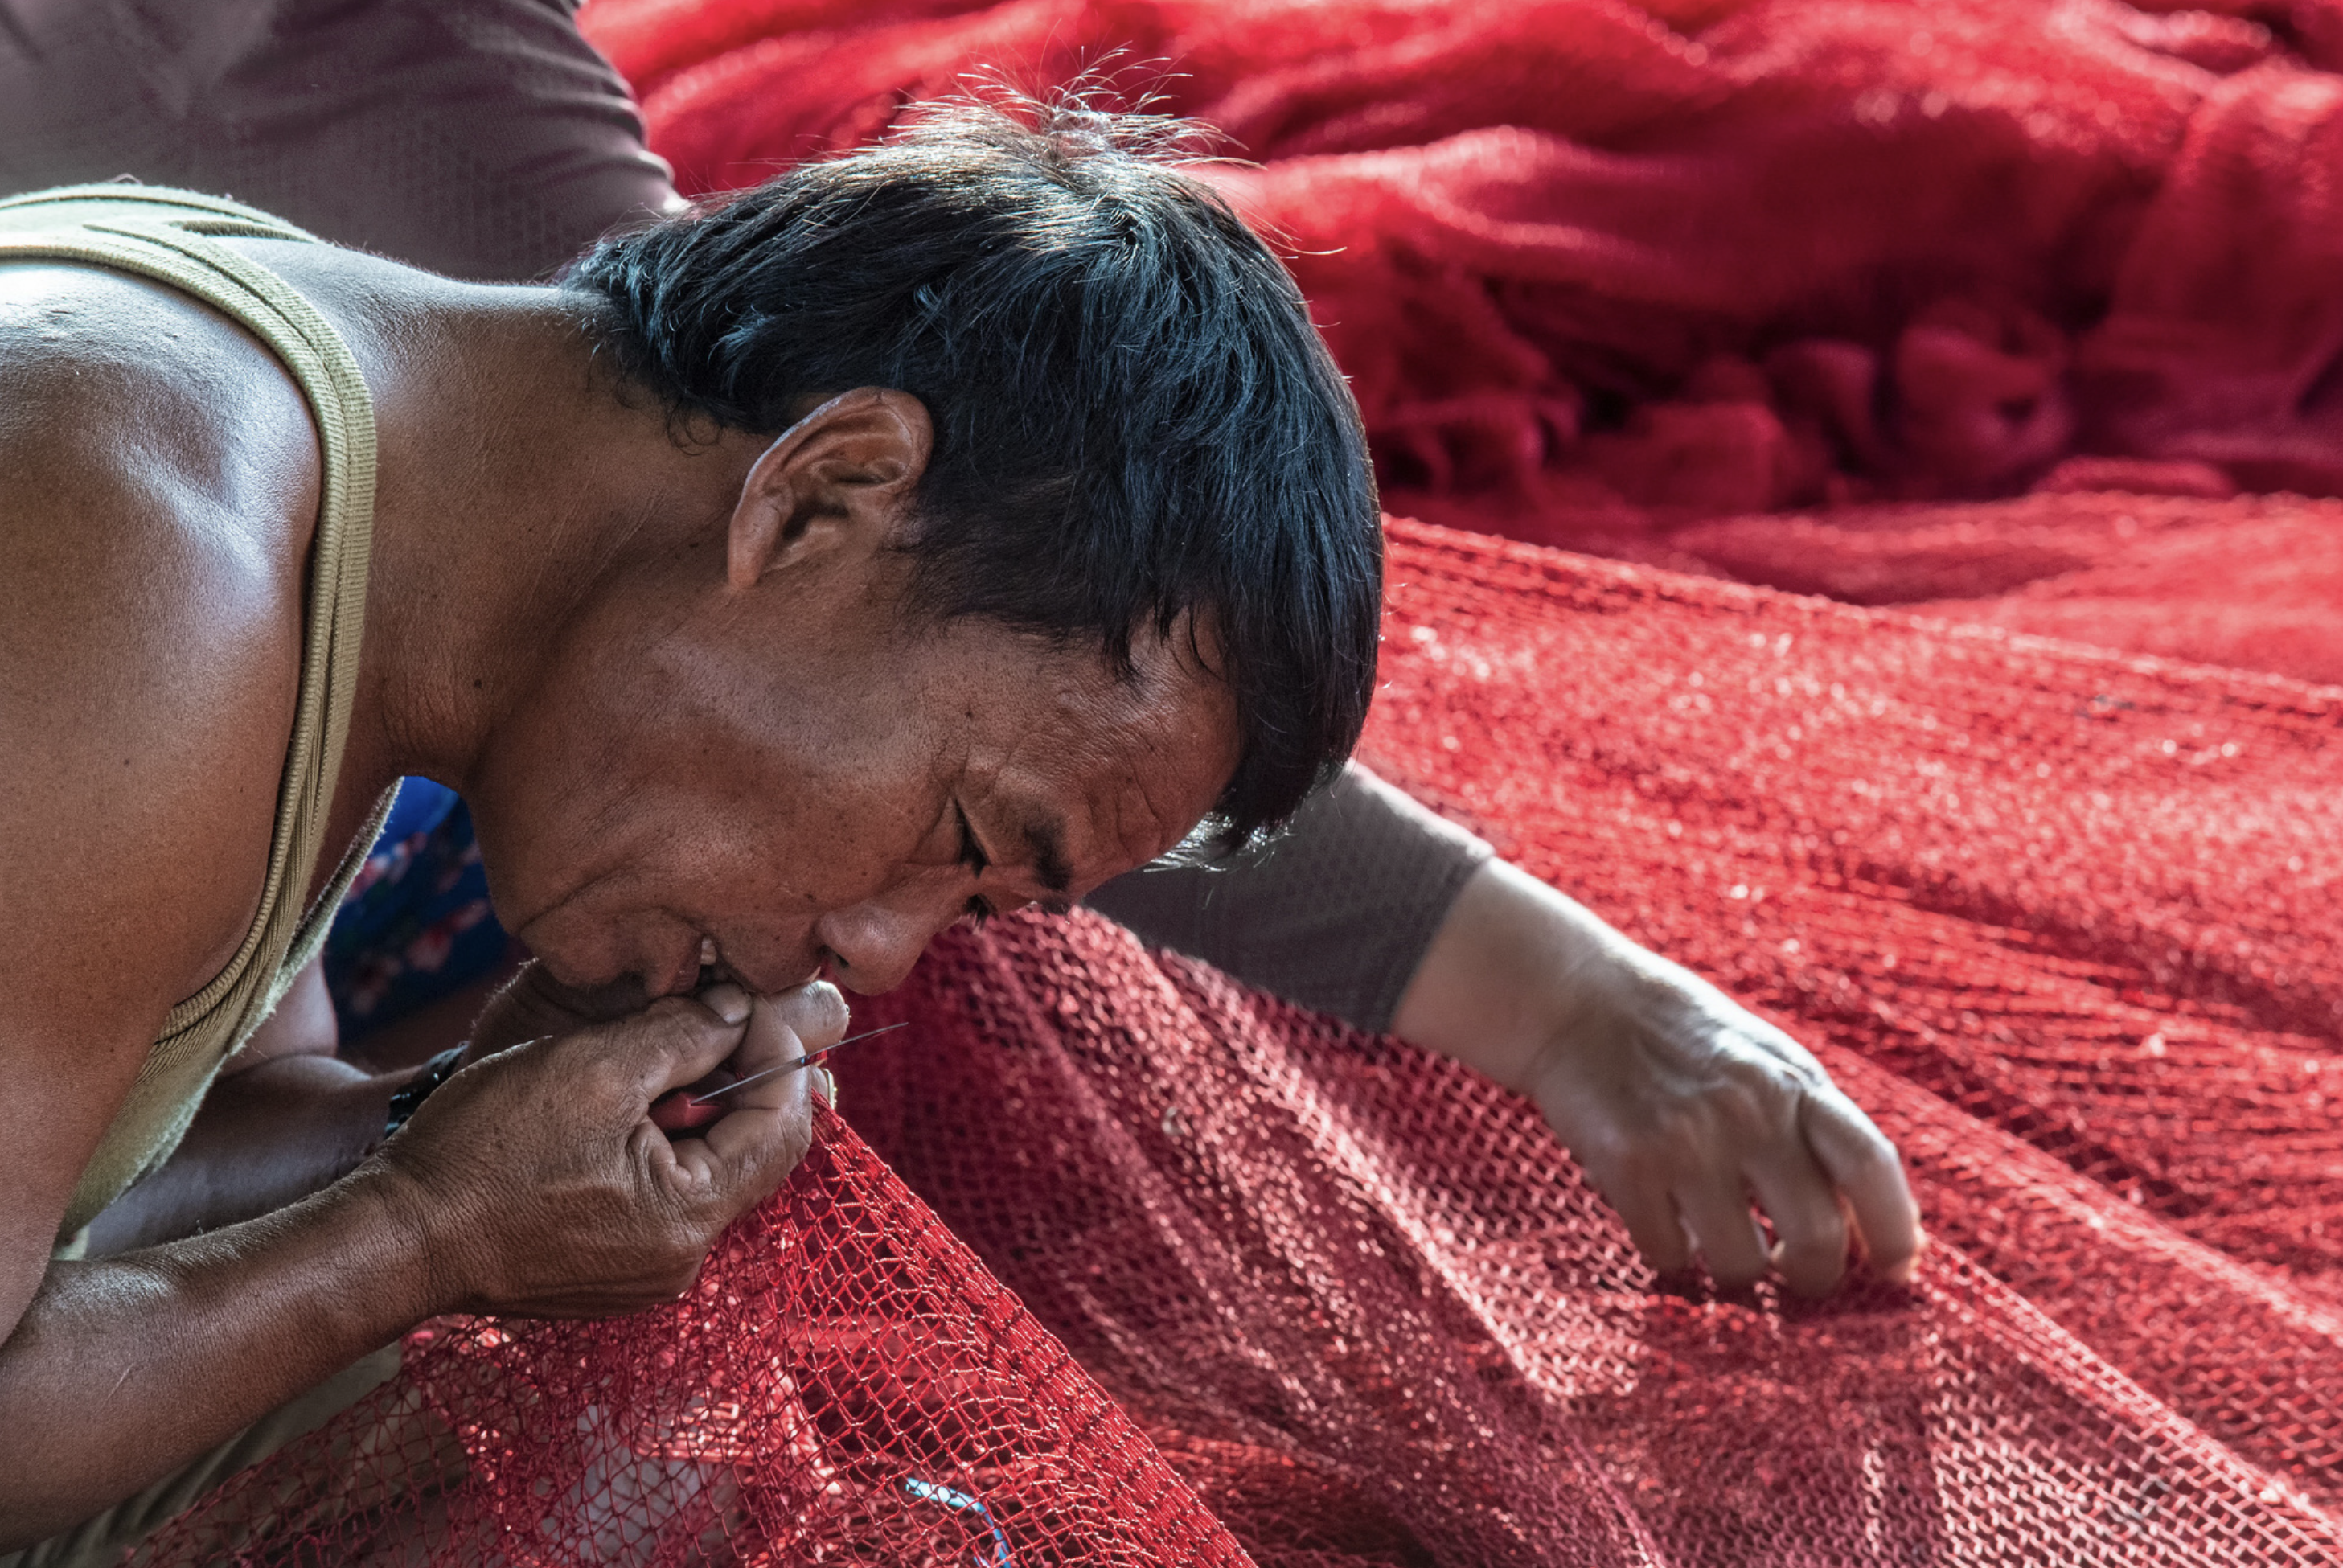 Chin Nghe, owner of a fishing boat, hurriedly fixed his net after he finished a fishing trip. Photo: Ly Hoang Long / Tuoi Tre